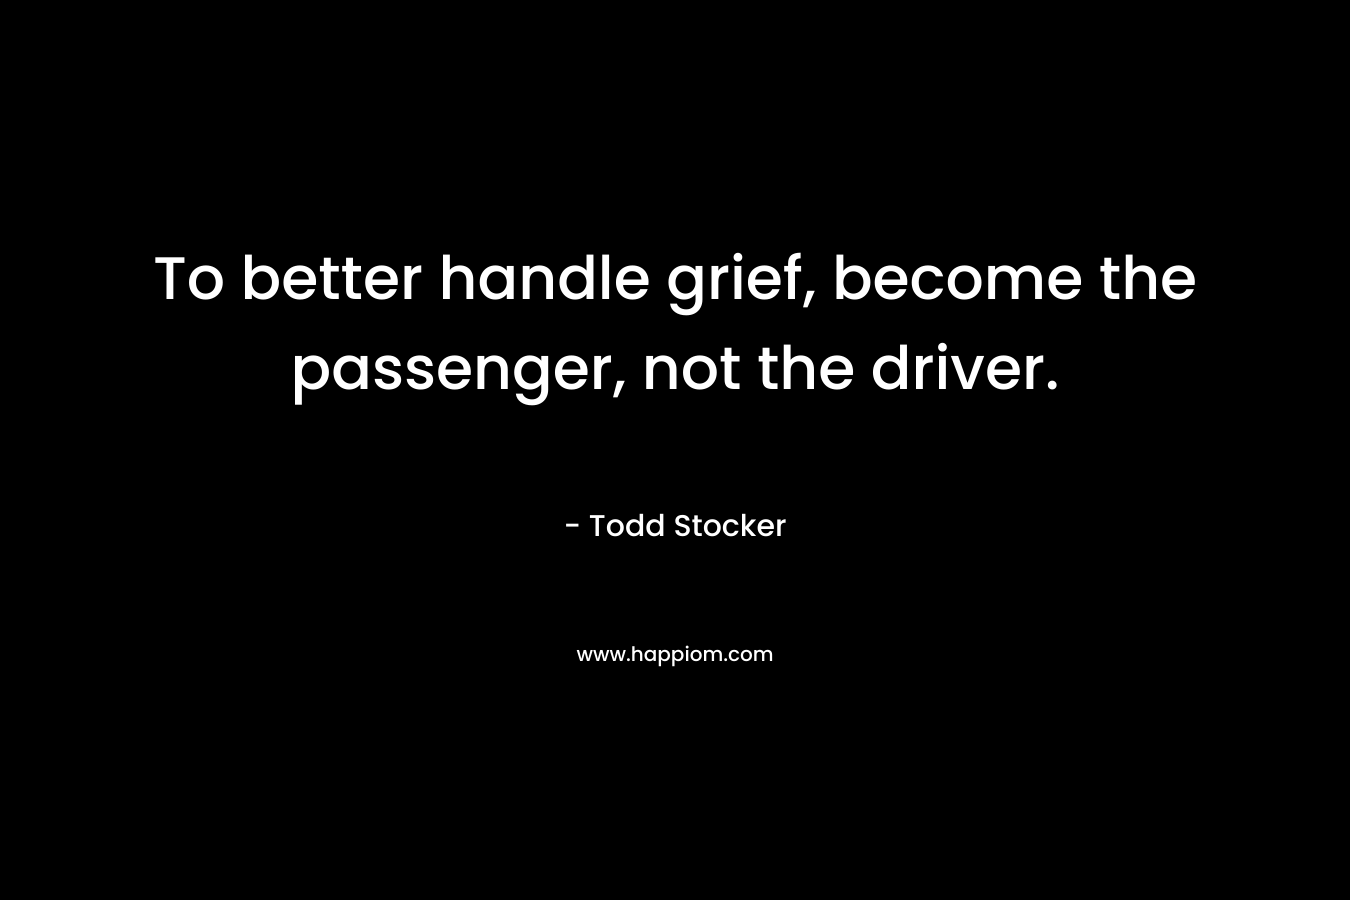 To better handle grief, become the passenger, not the driver.